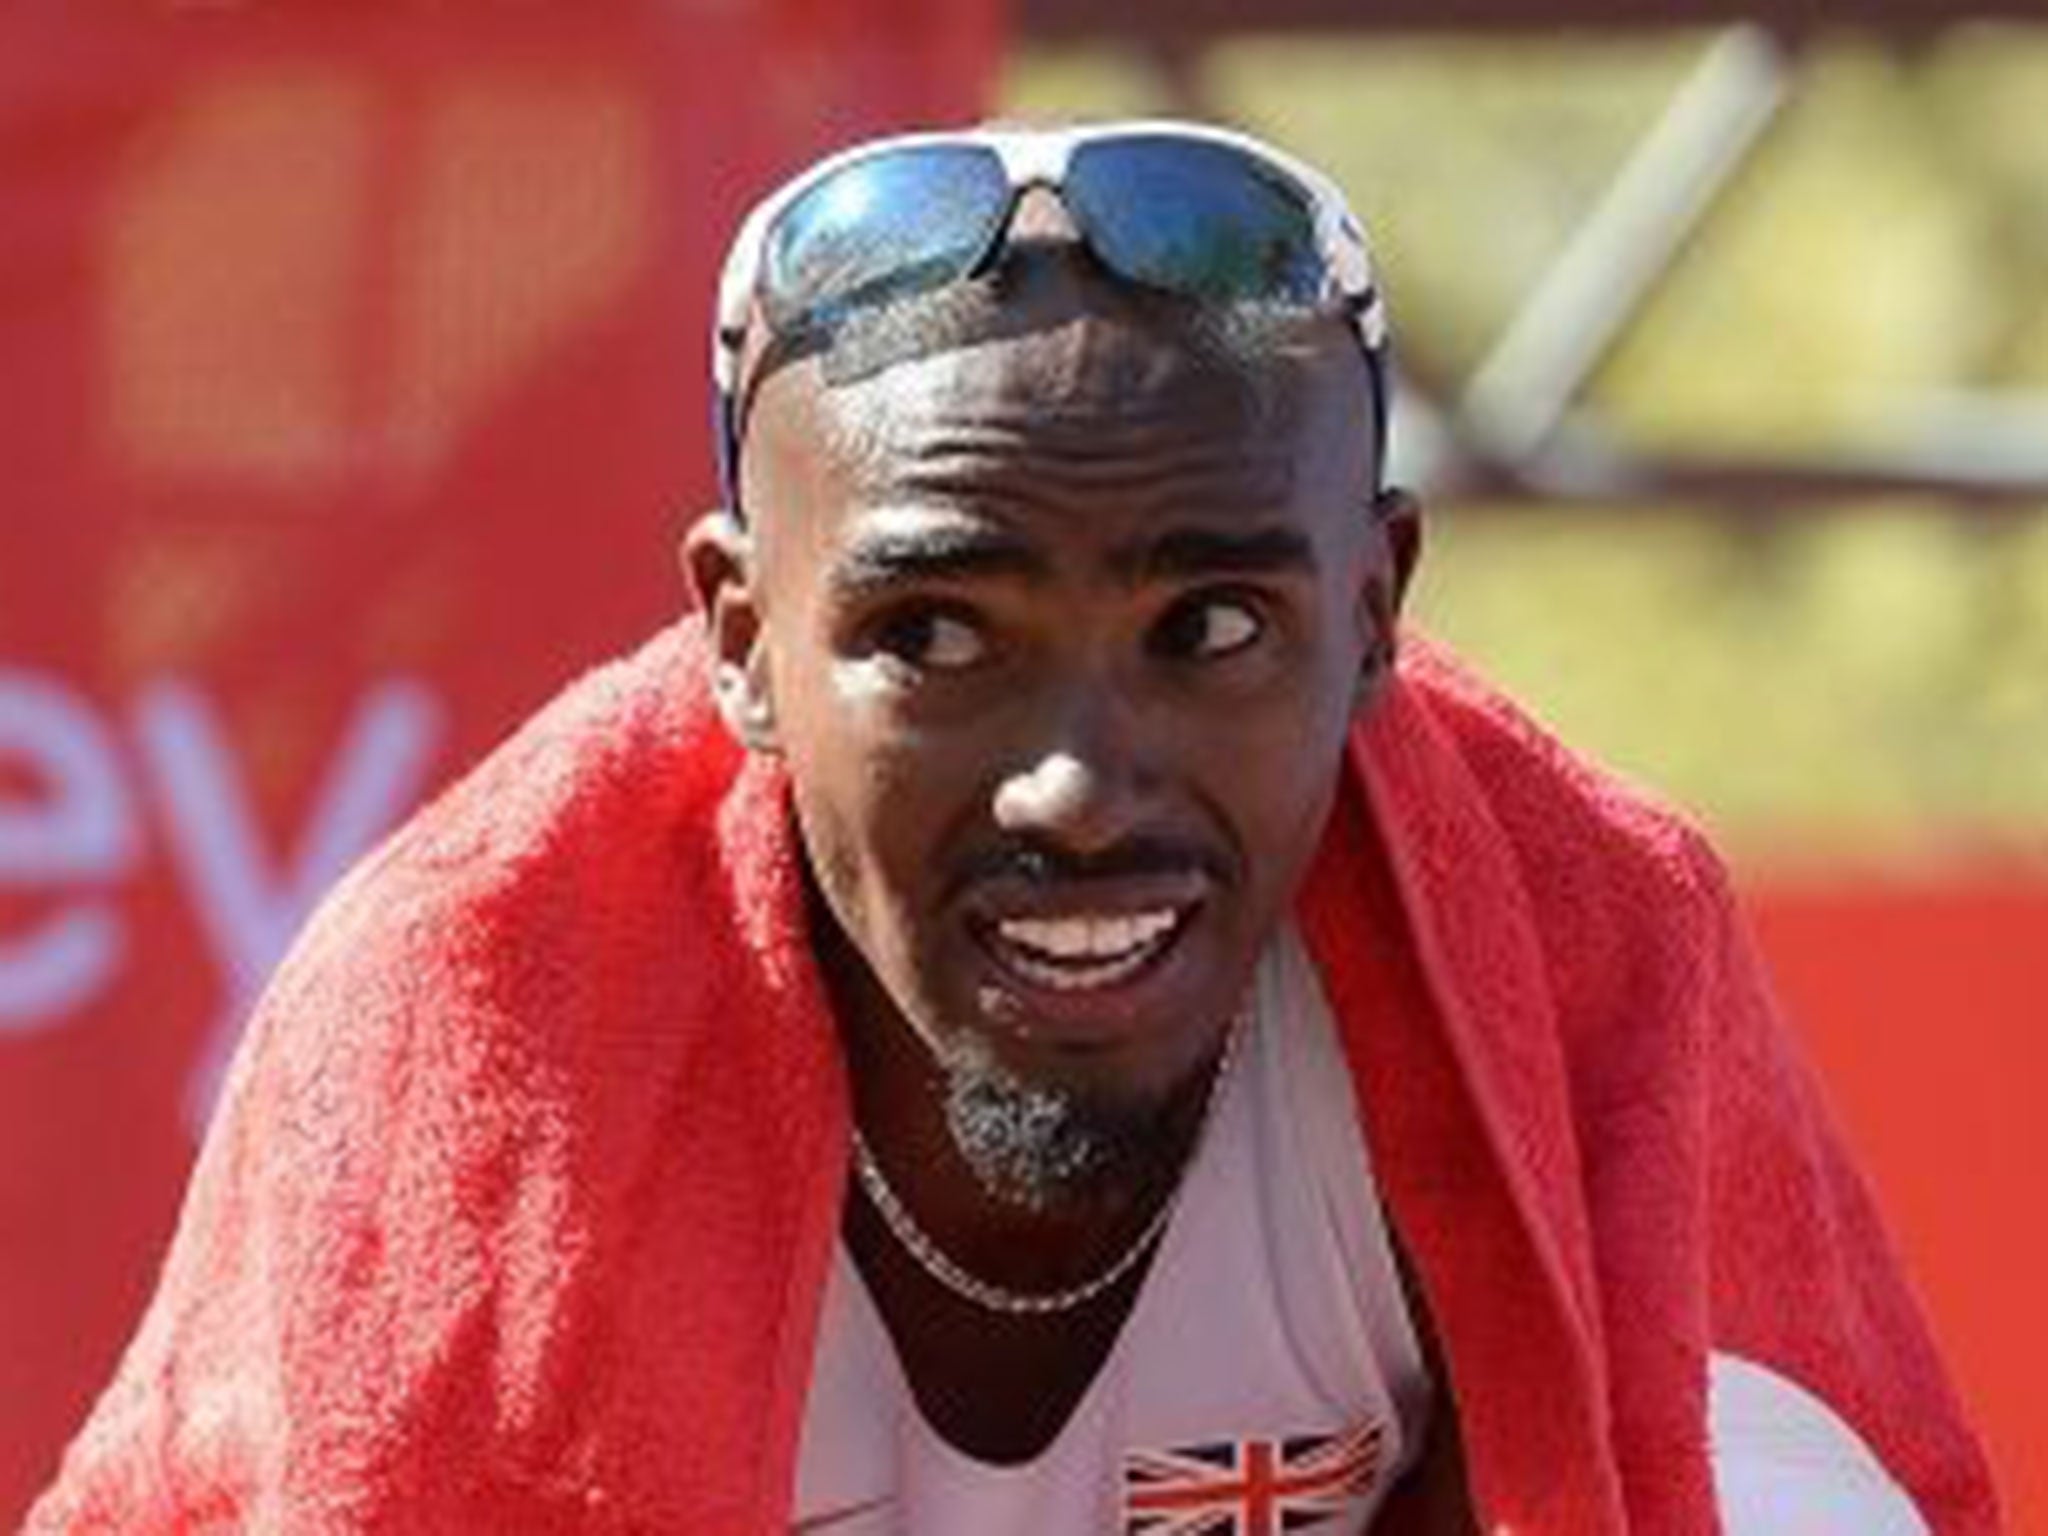 Britain’s Mo Farah felt he should have ‘done better’ than finishing eighth in the London Marathon